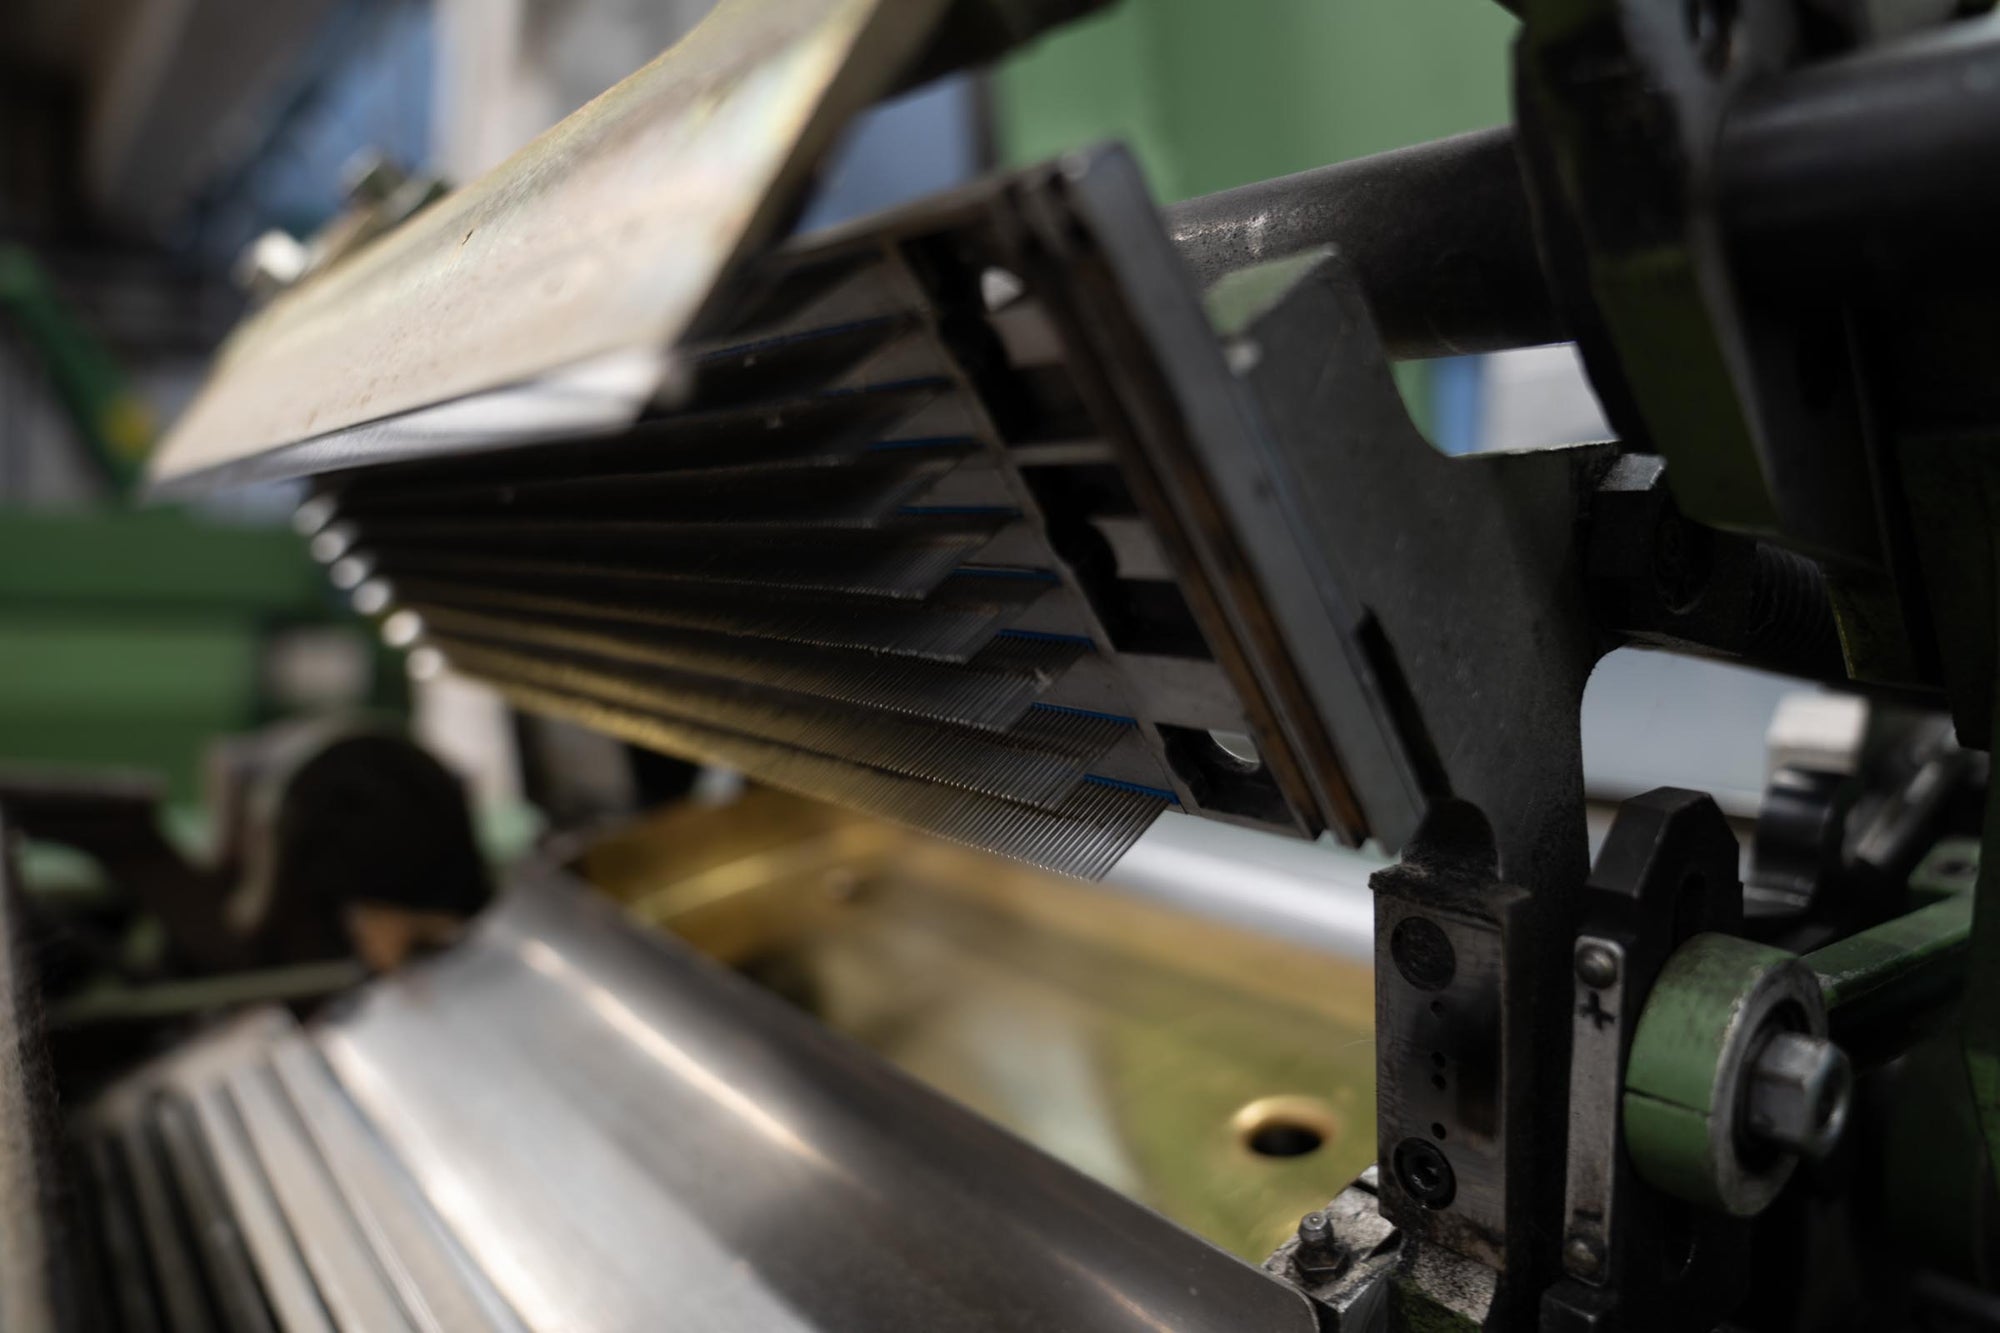 A close-up shot of a tops combing machine at the ARA spinning facility.